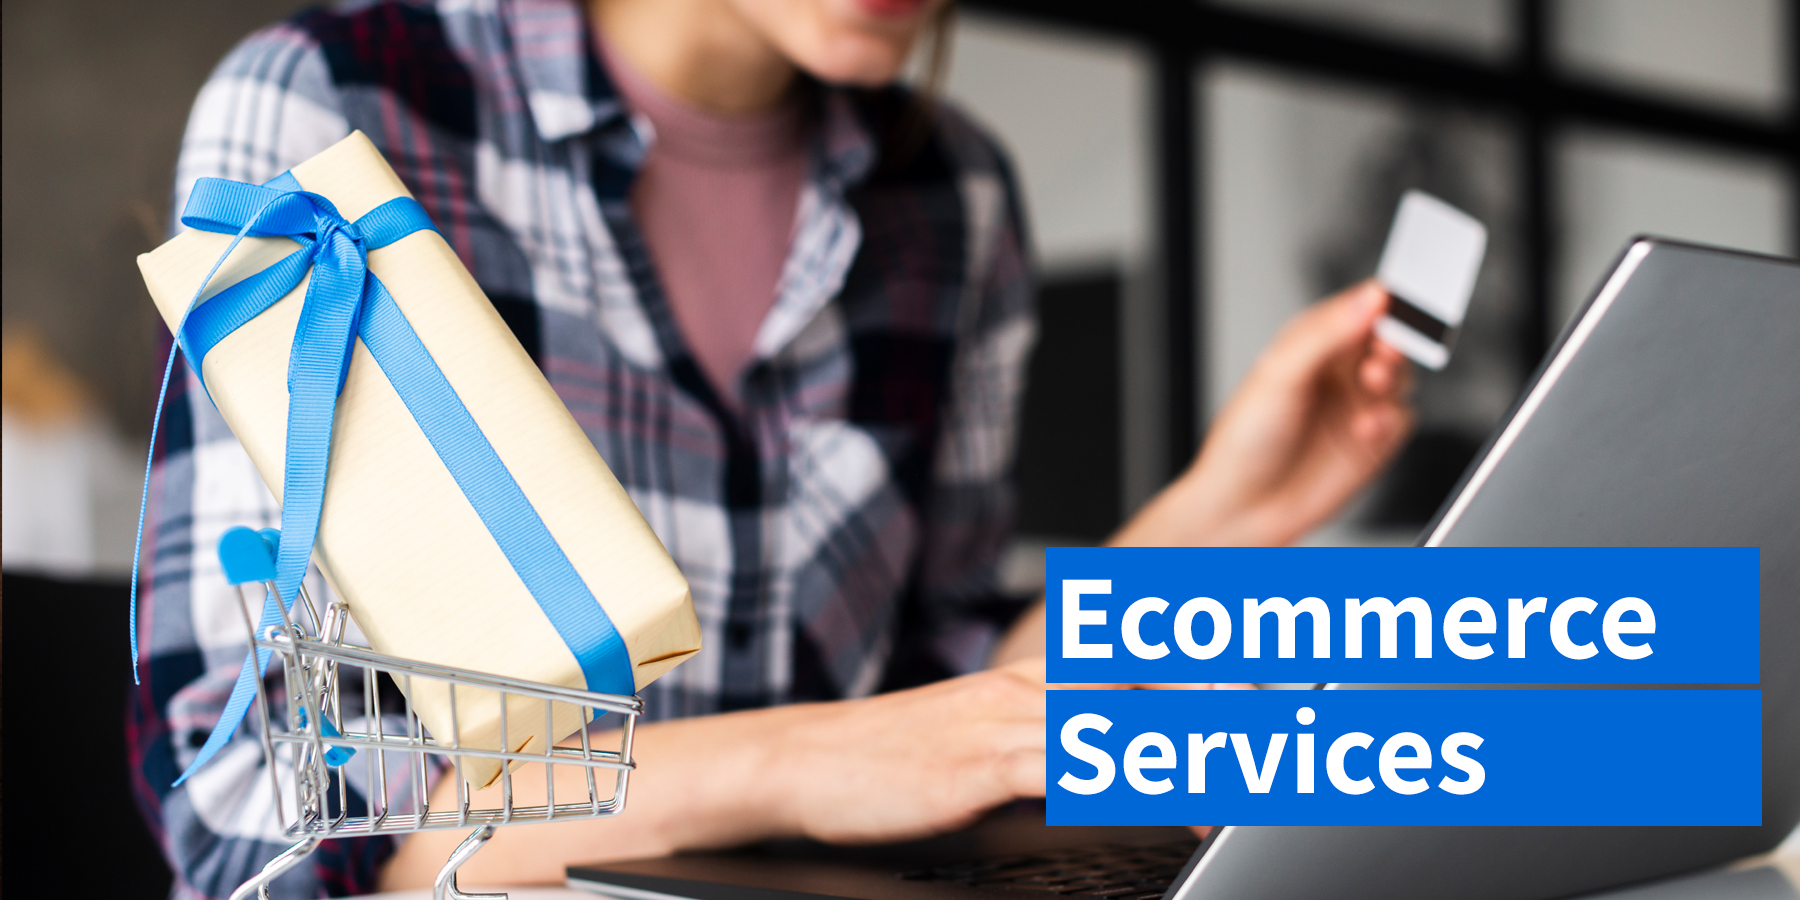 vserve | Exceptional Customer Experiences with Ecommerce Customer Service